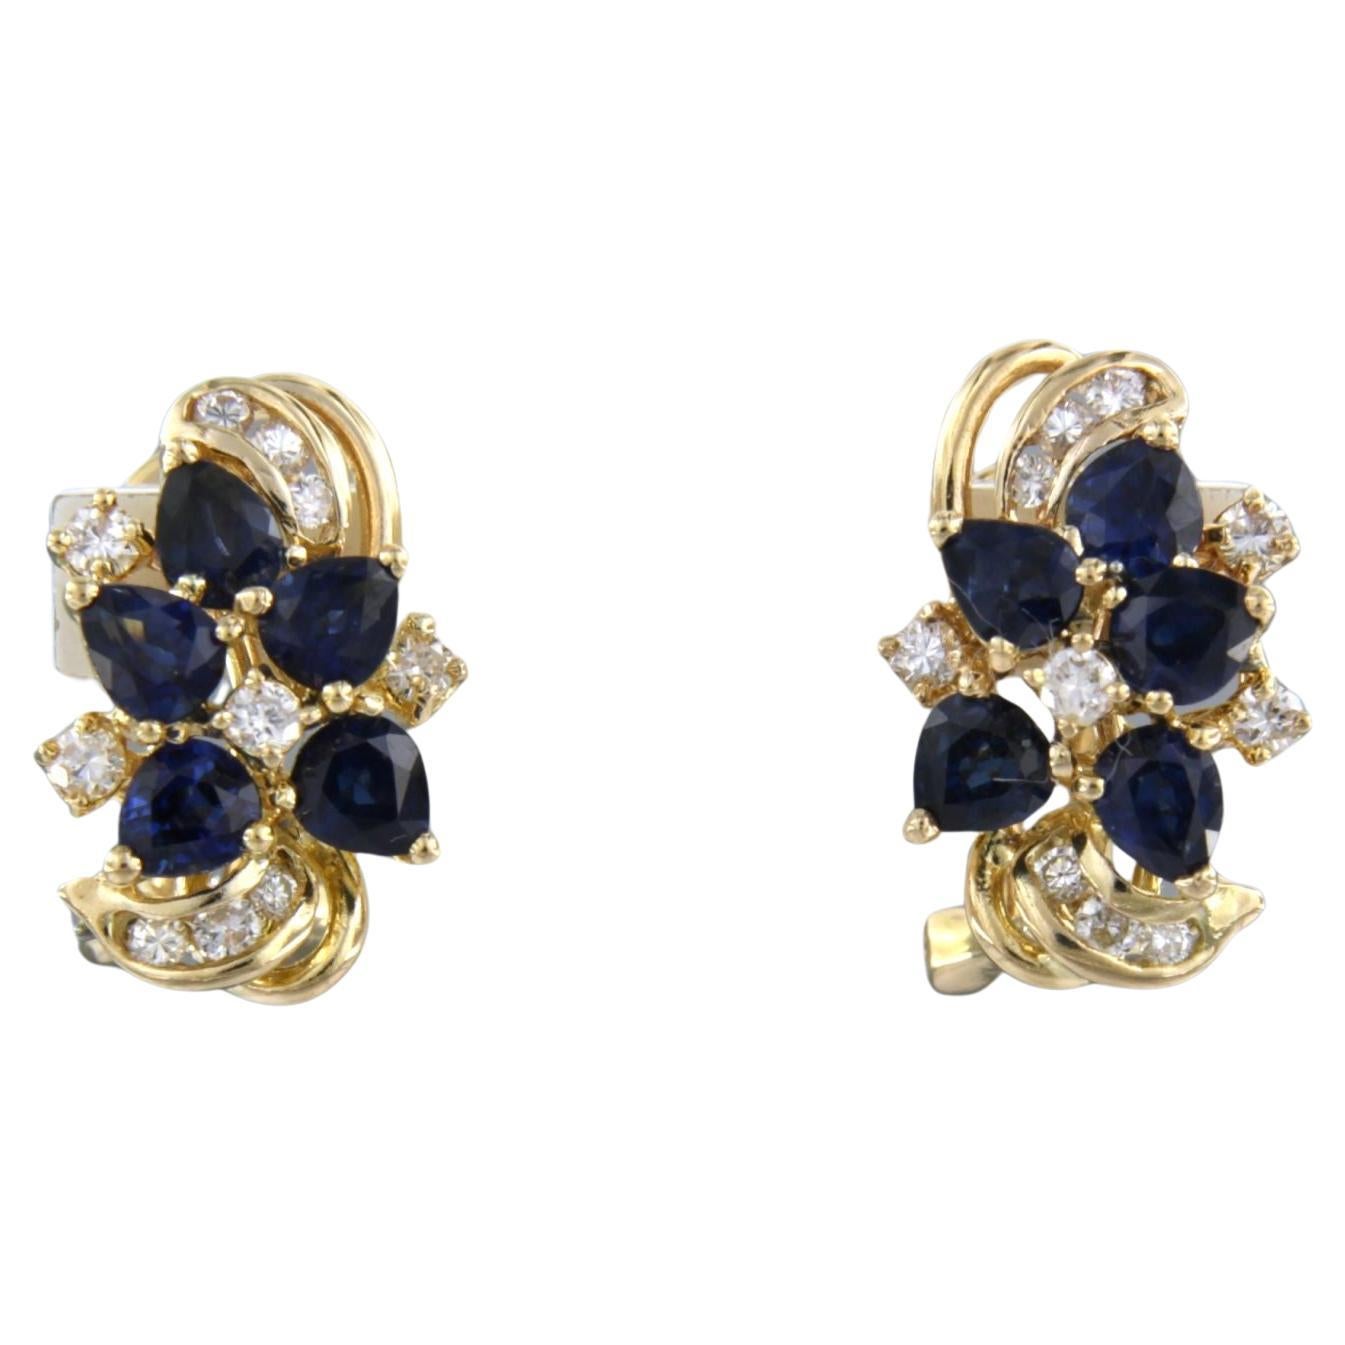 Earrings set with sapphire and diamonds 18k yellow gold